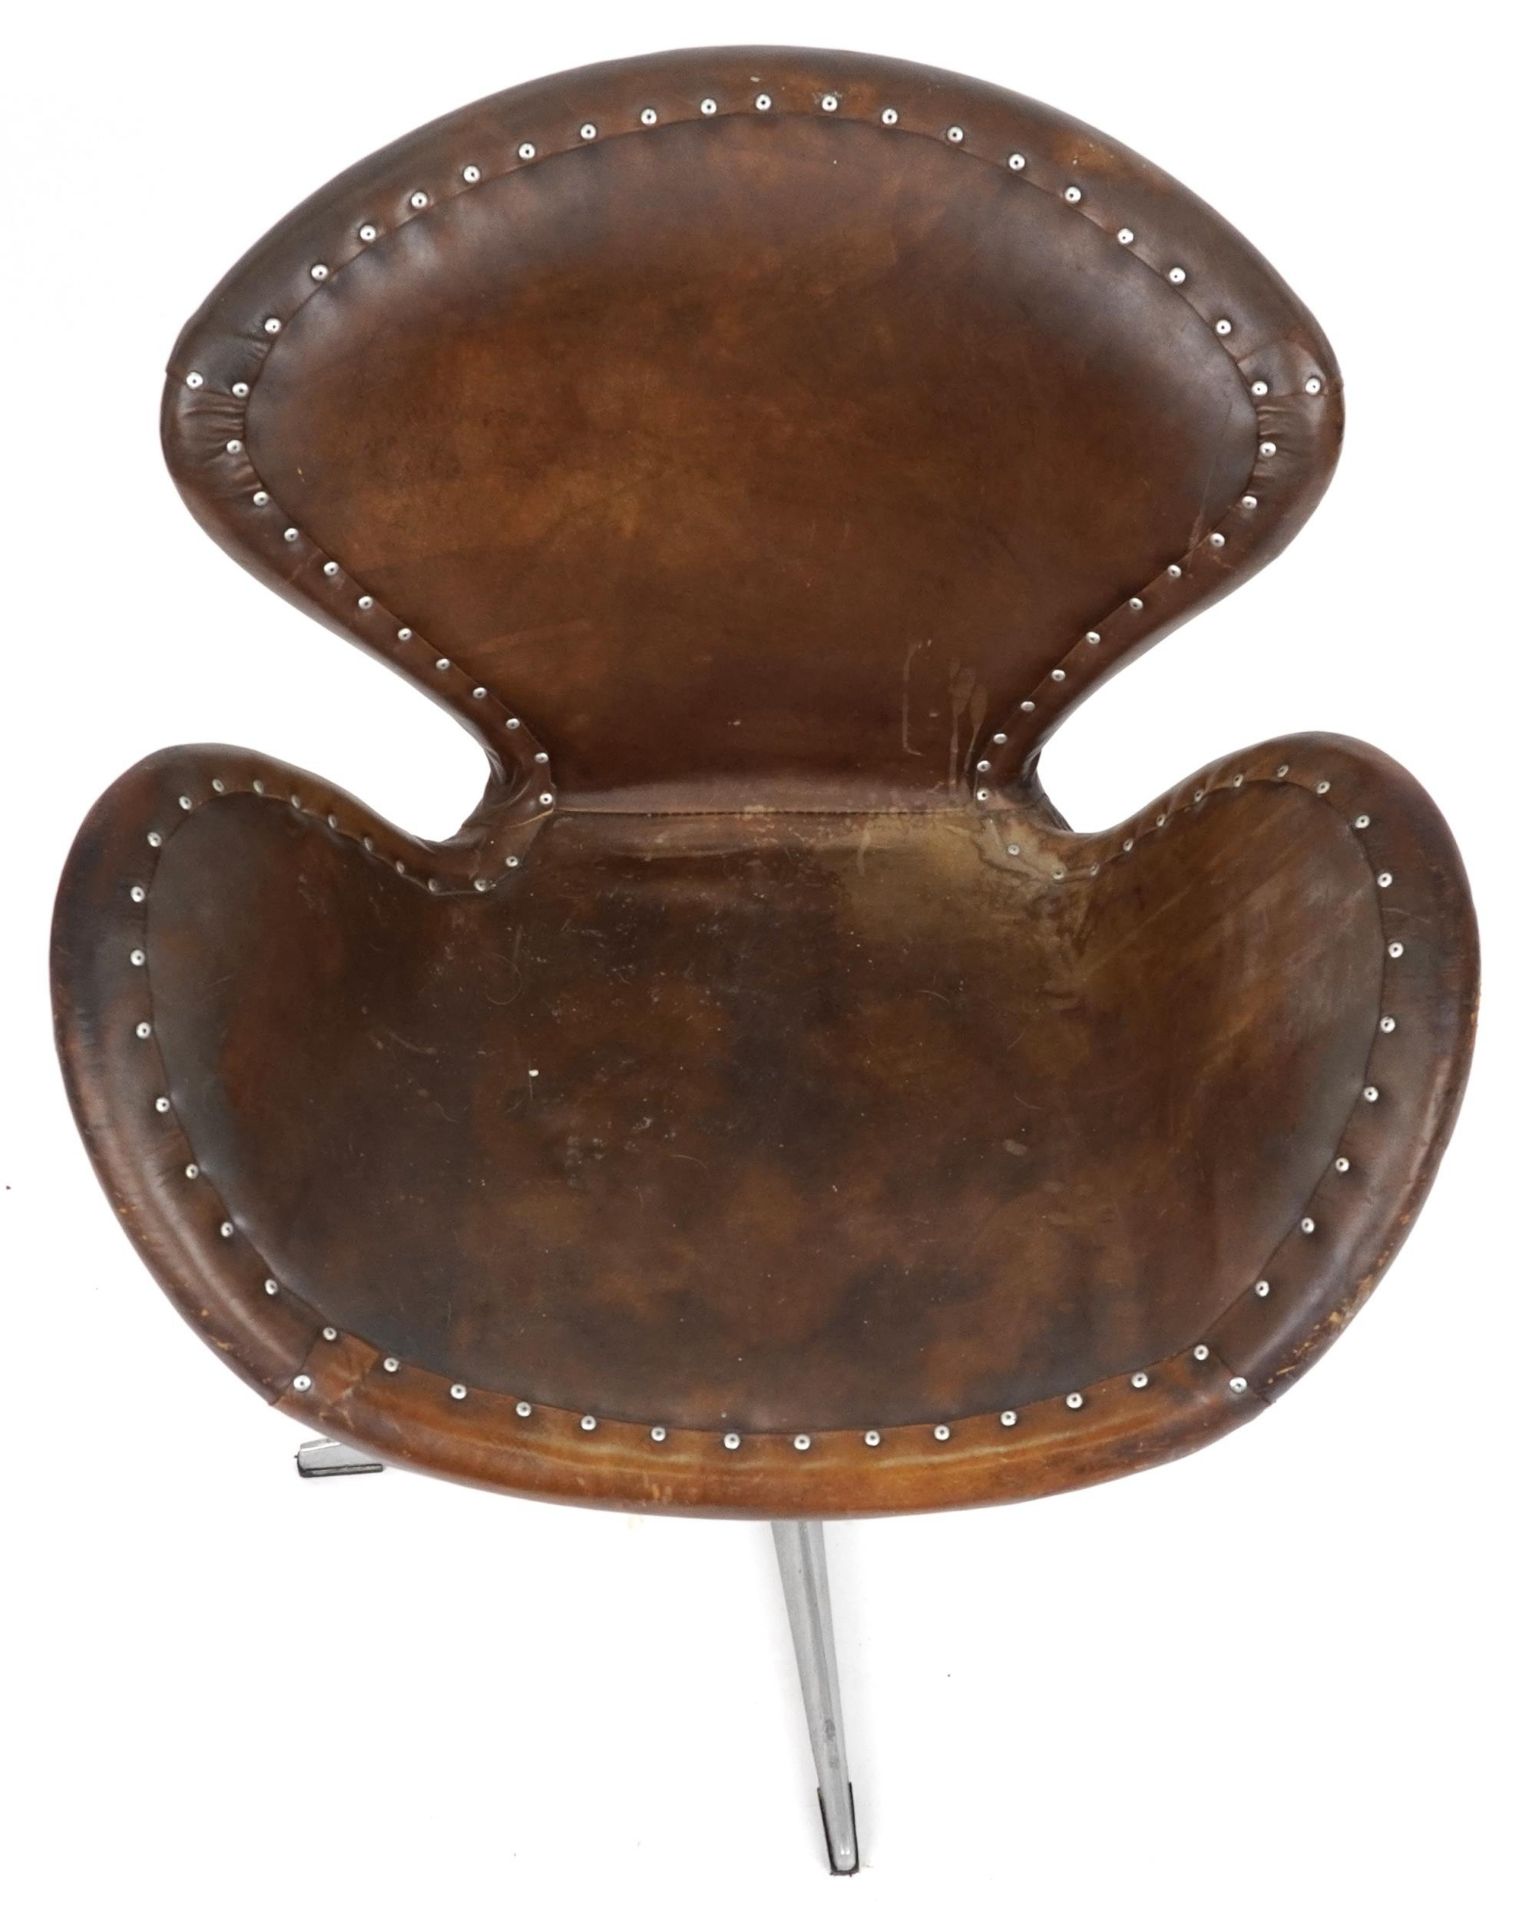 Timothy Oulton aviation interest Devon Spitfire swivel chair with brown leather upholstery, 90cm - Image 3 of 4